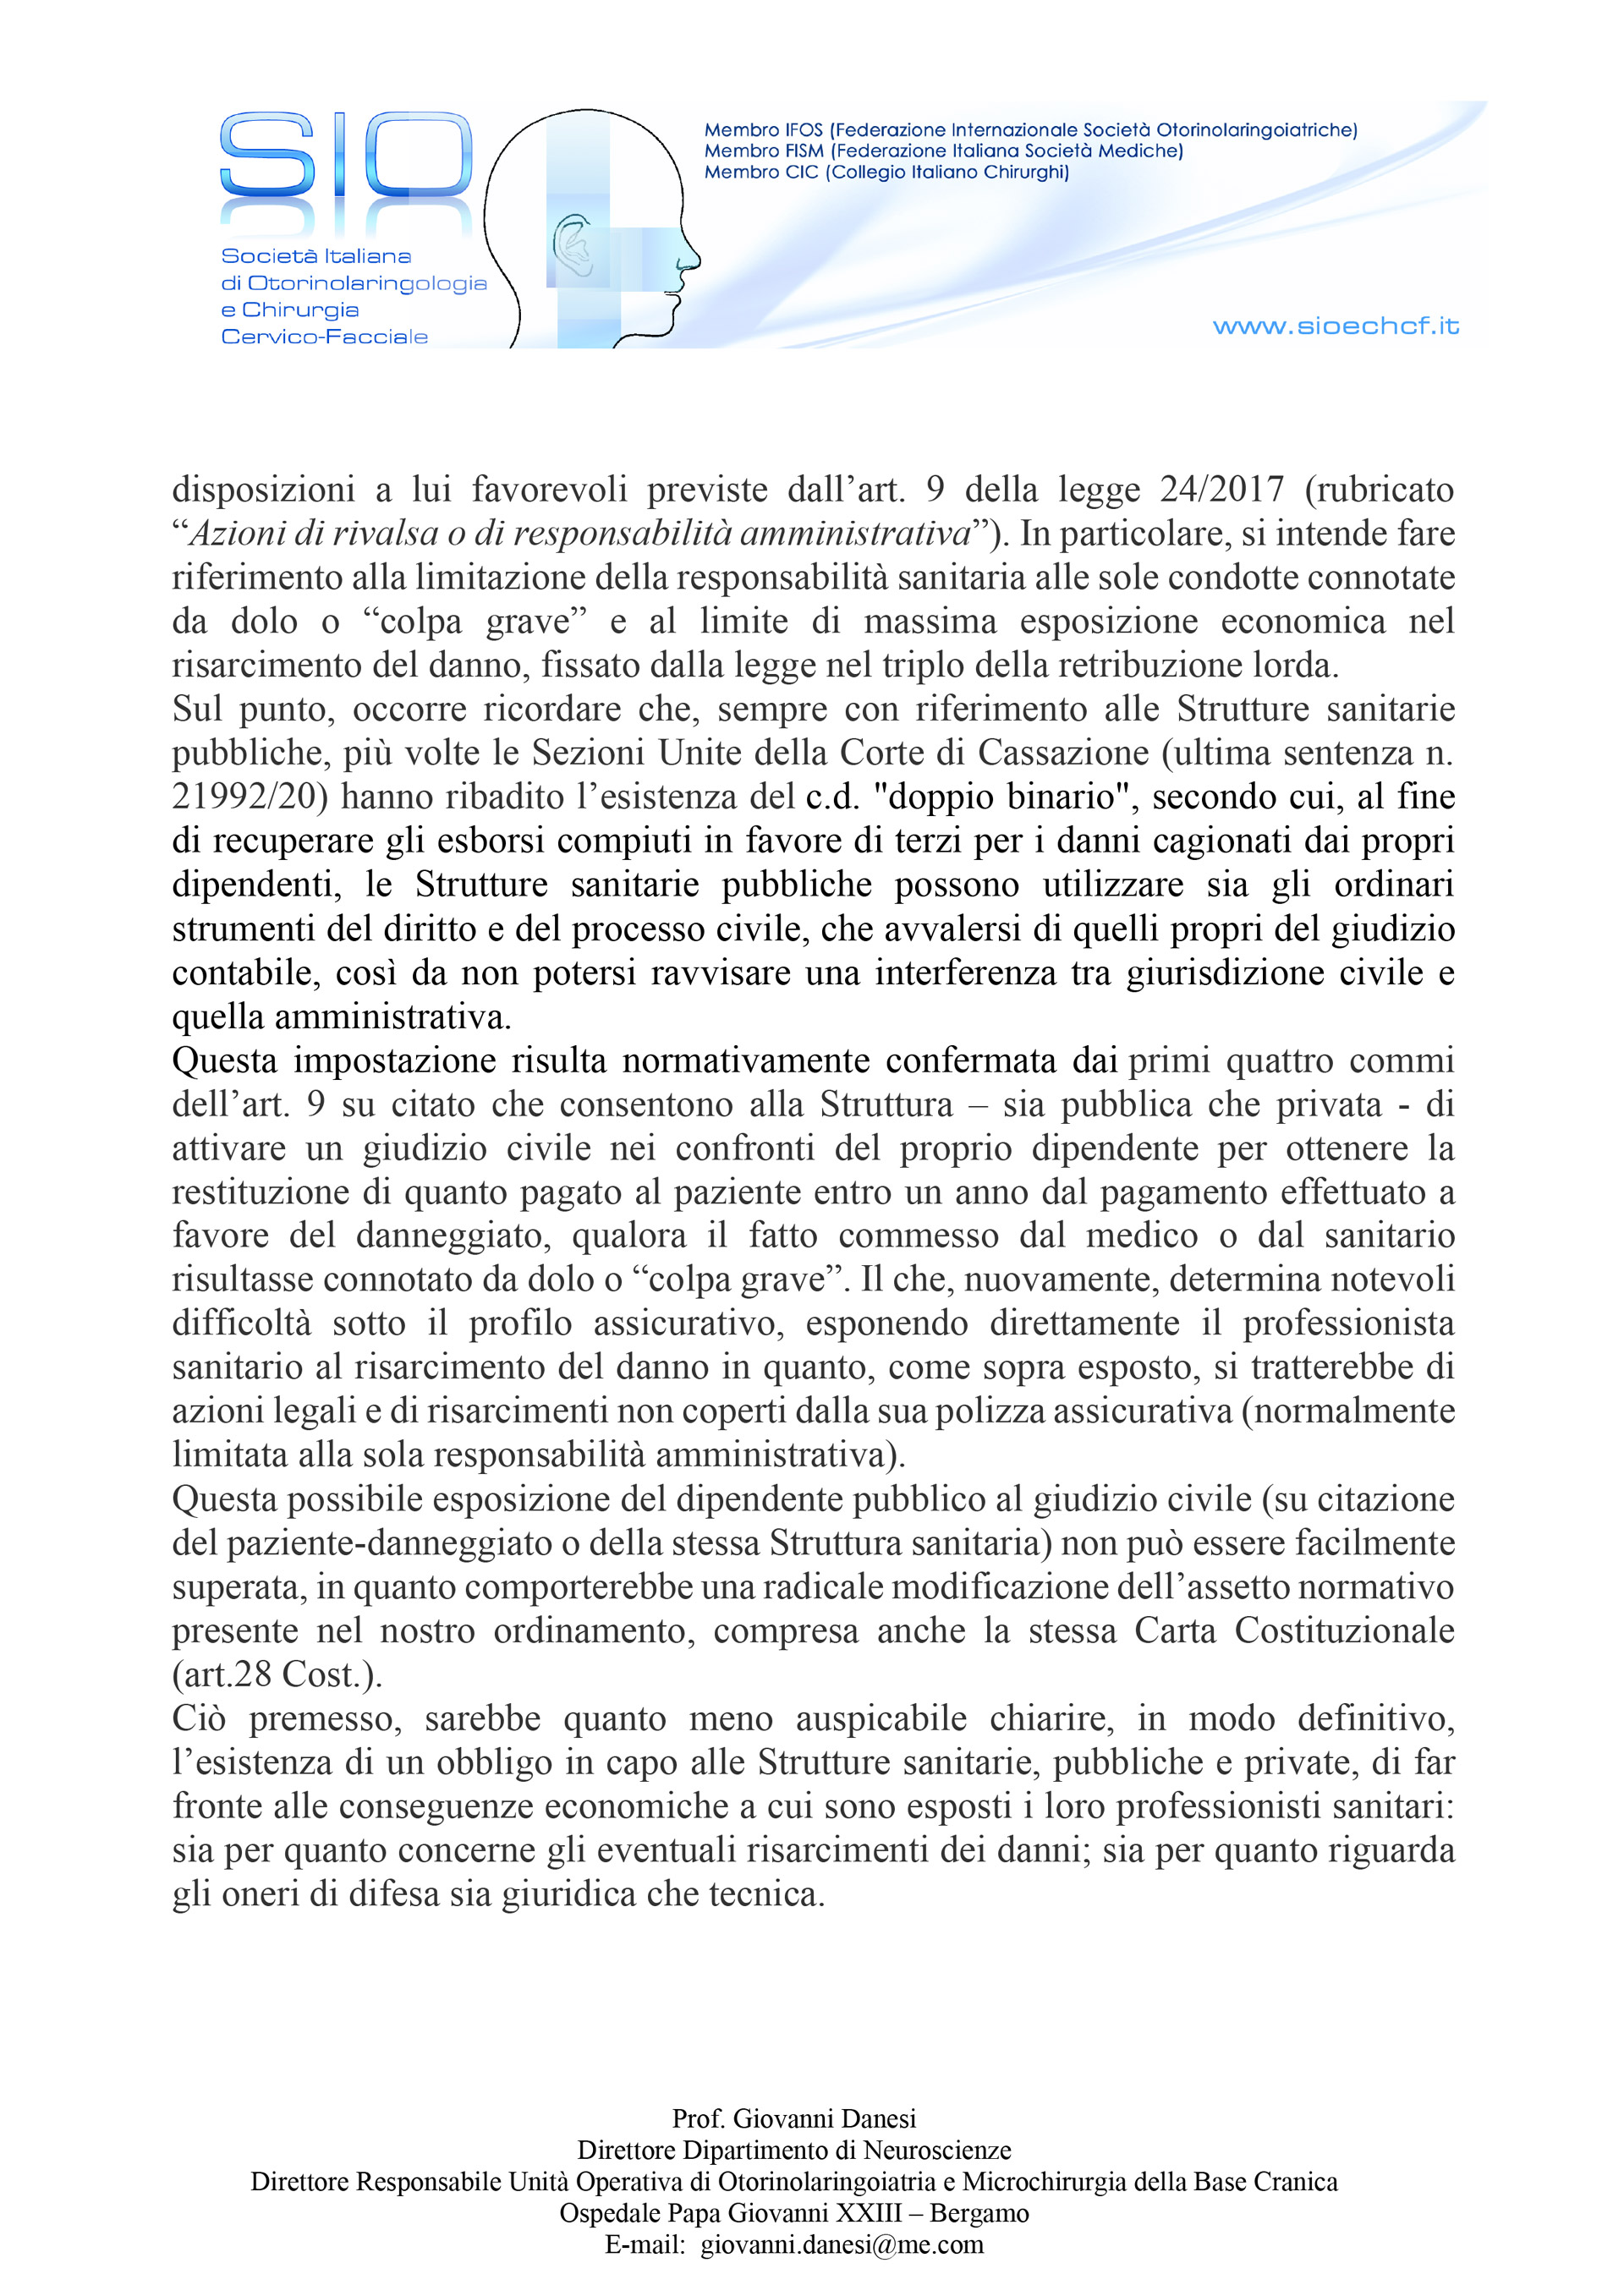 LetteraSIOperCIC-6